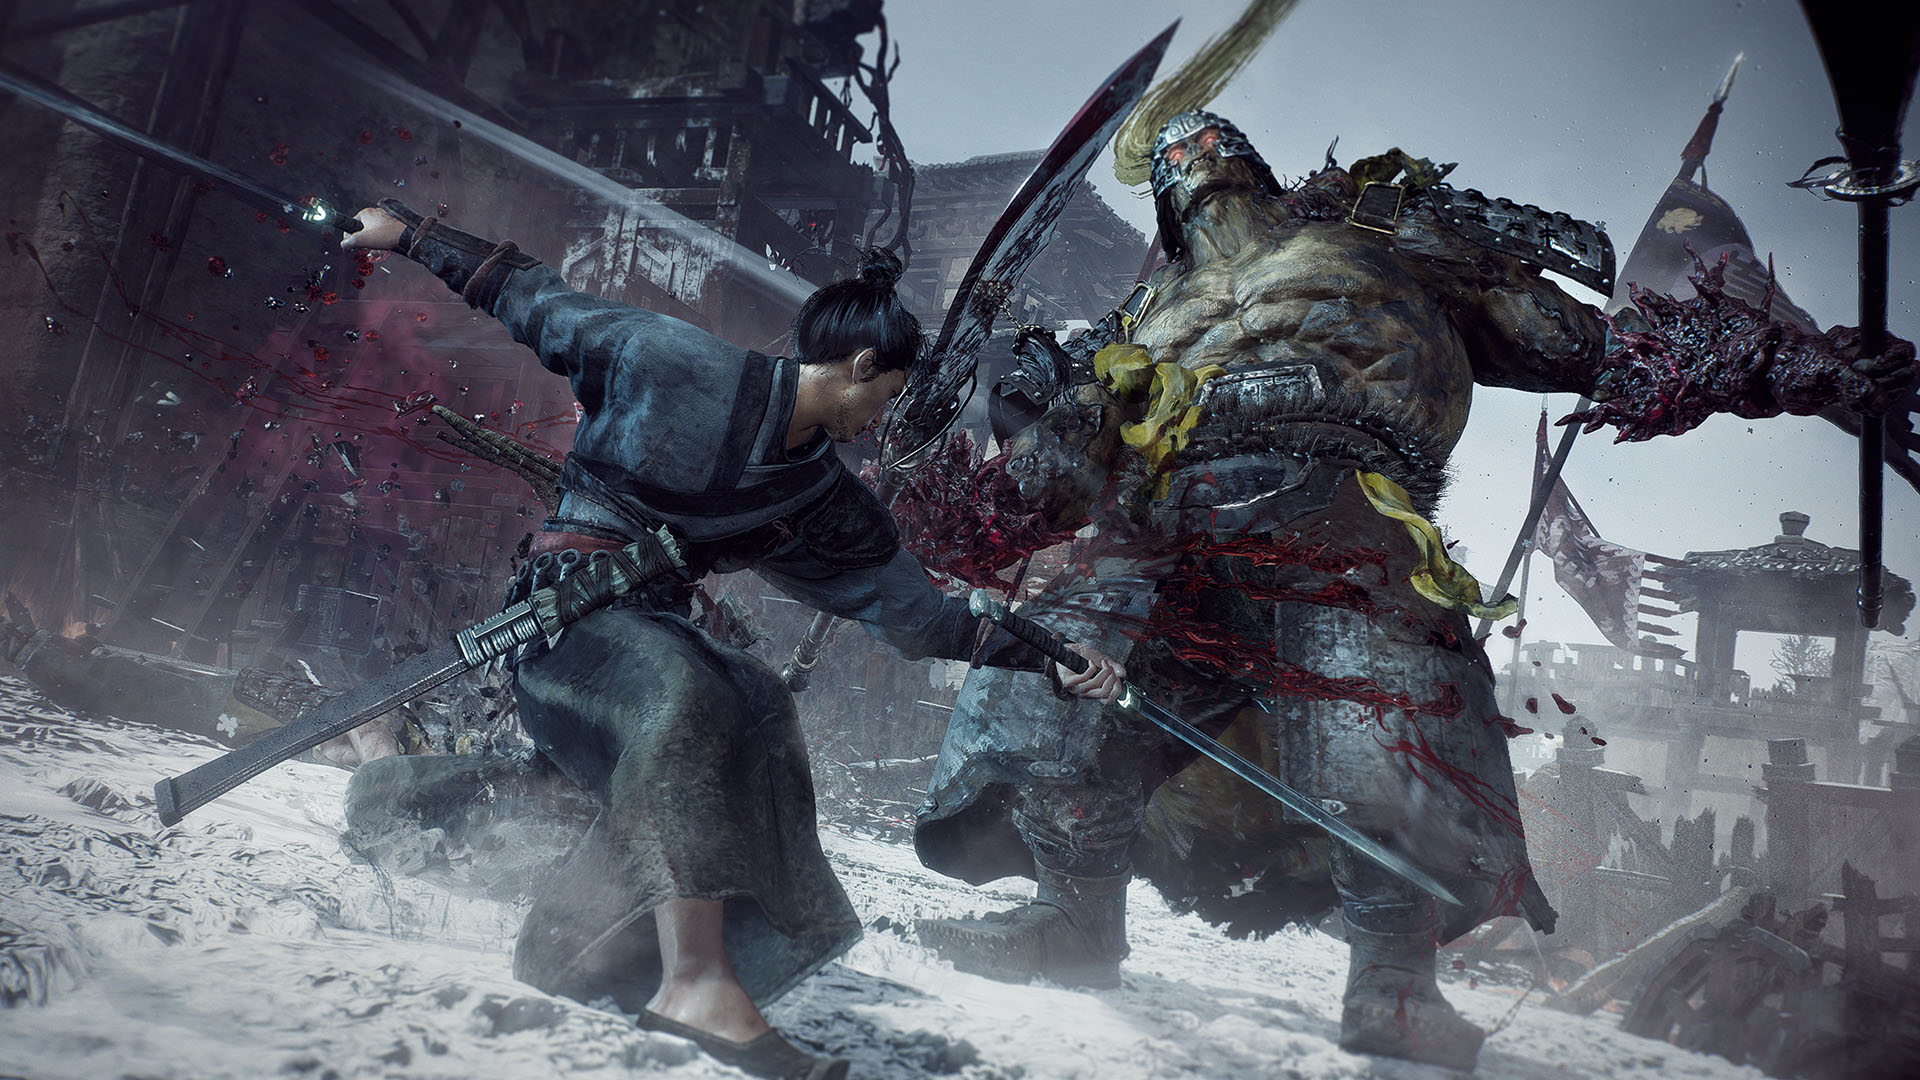 Ghost of Tsushima PC Requirements: Minimum, Recommended Specs